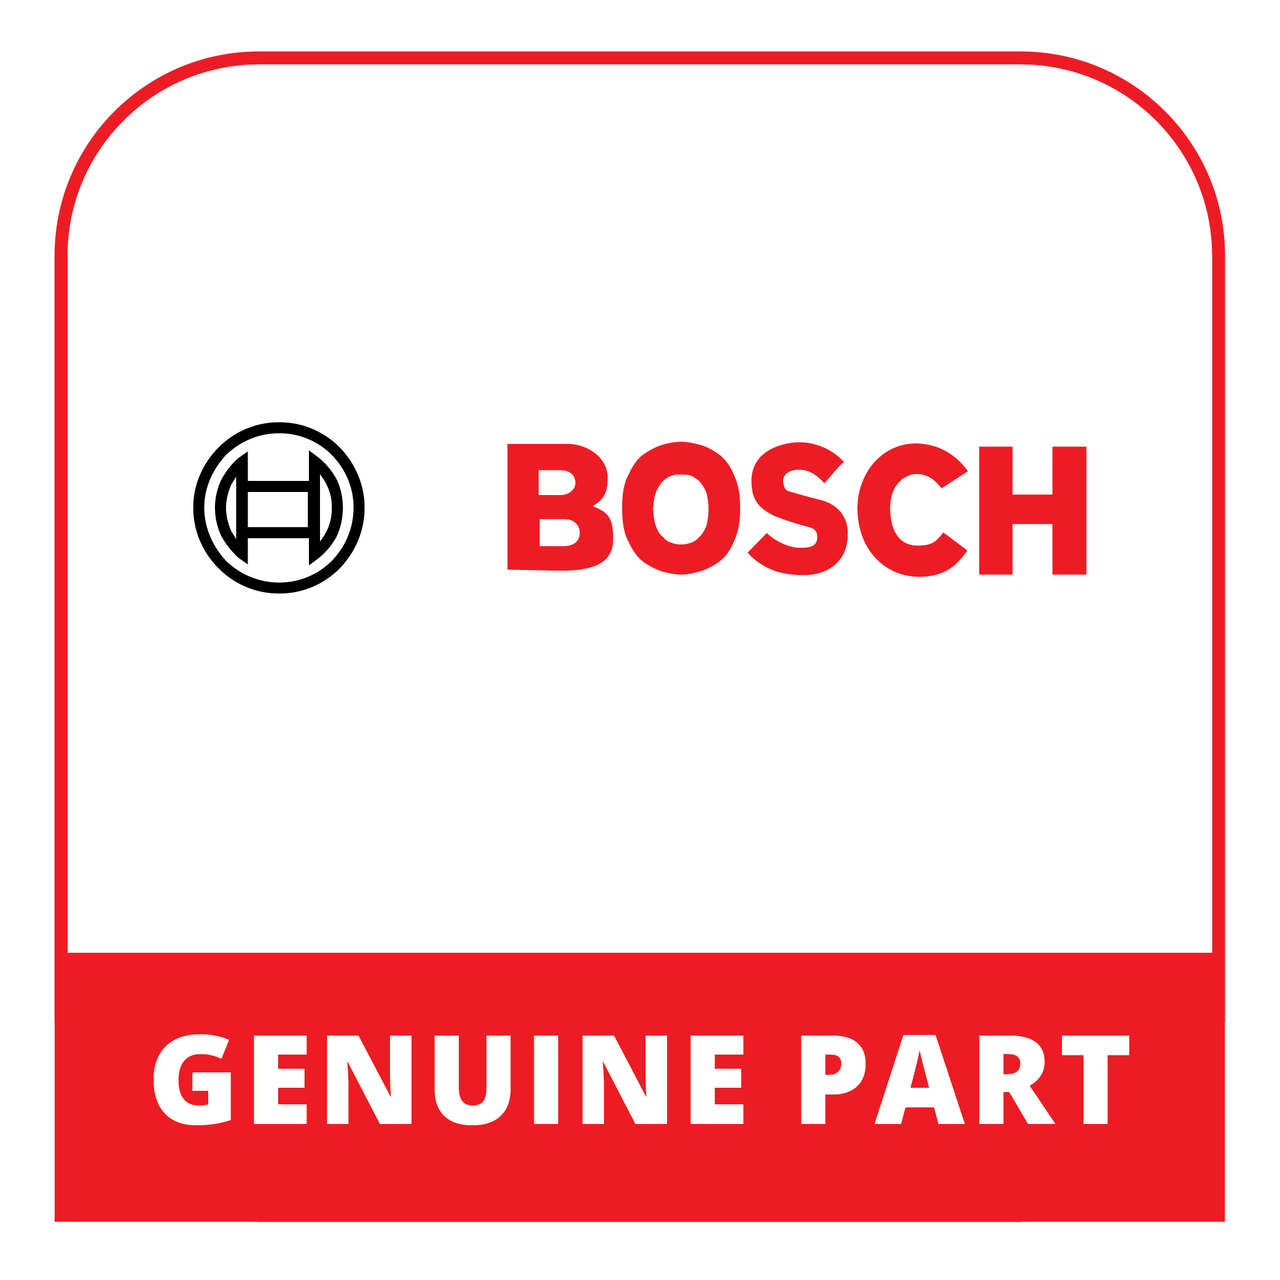 Bosch (Thermador) 10015686 - Nozzle Set Natural Gas - Genuine Bosch (Thermador) Part